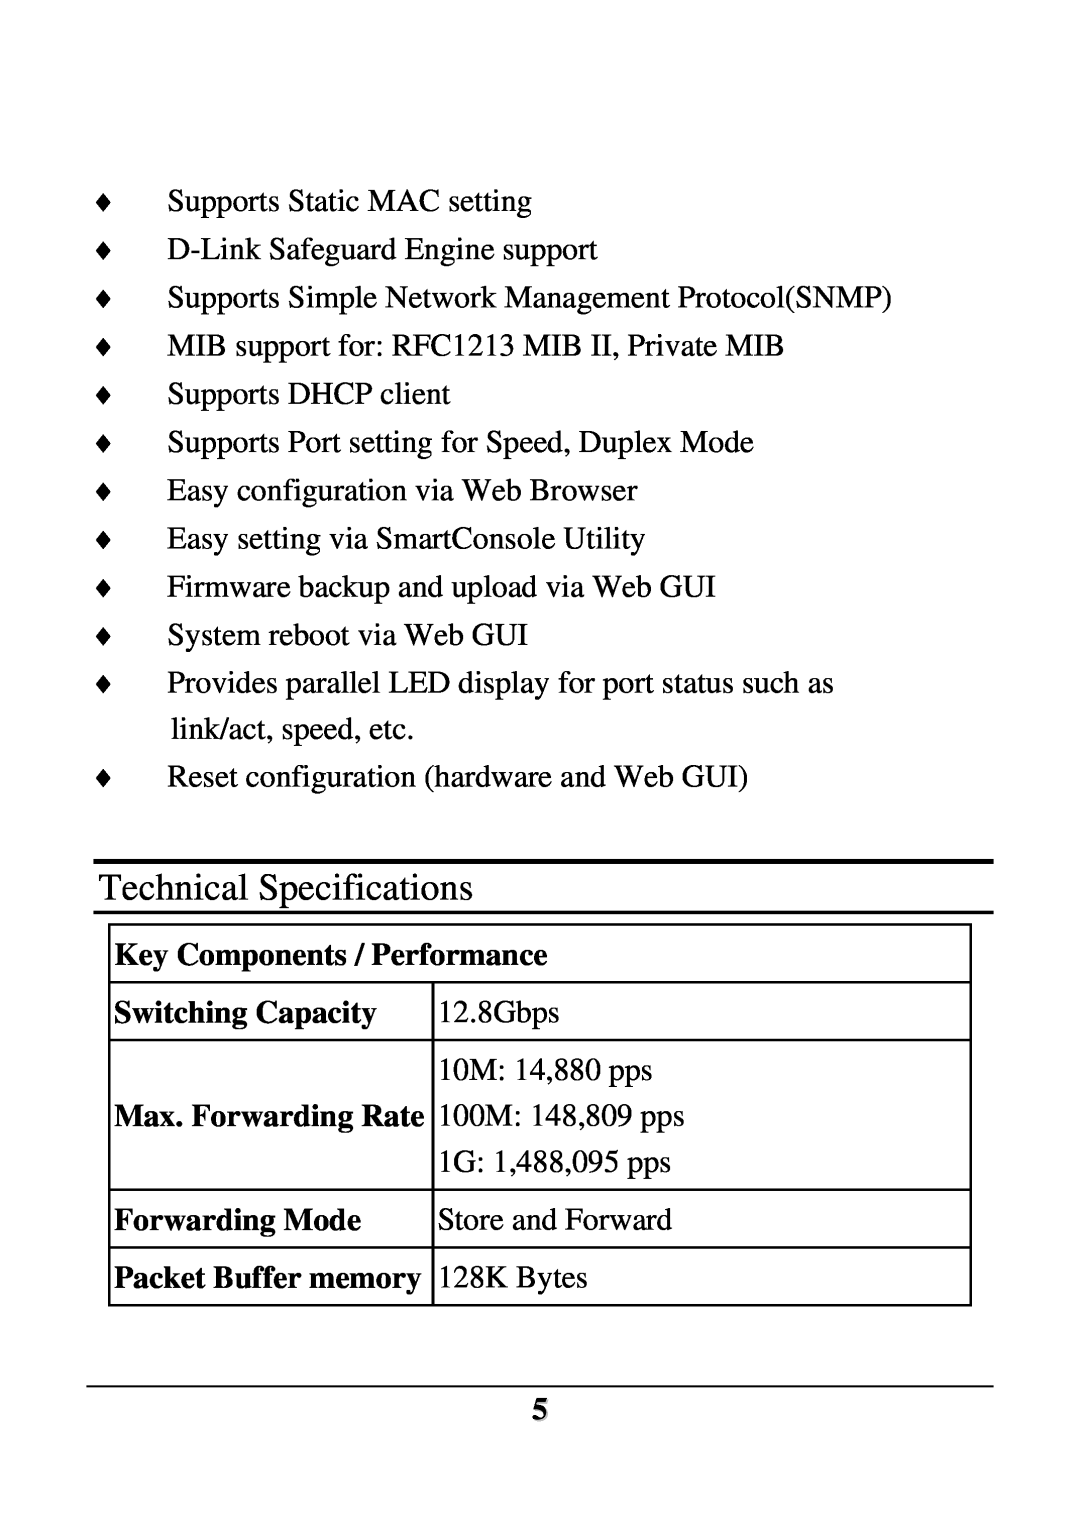 D-Link DES-1228 Technical Specifications, Key Components / Performance, Switching Capacity, Max. Forwarding Rate 